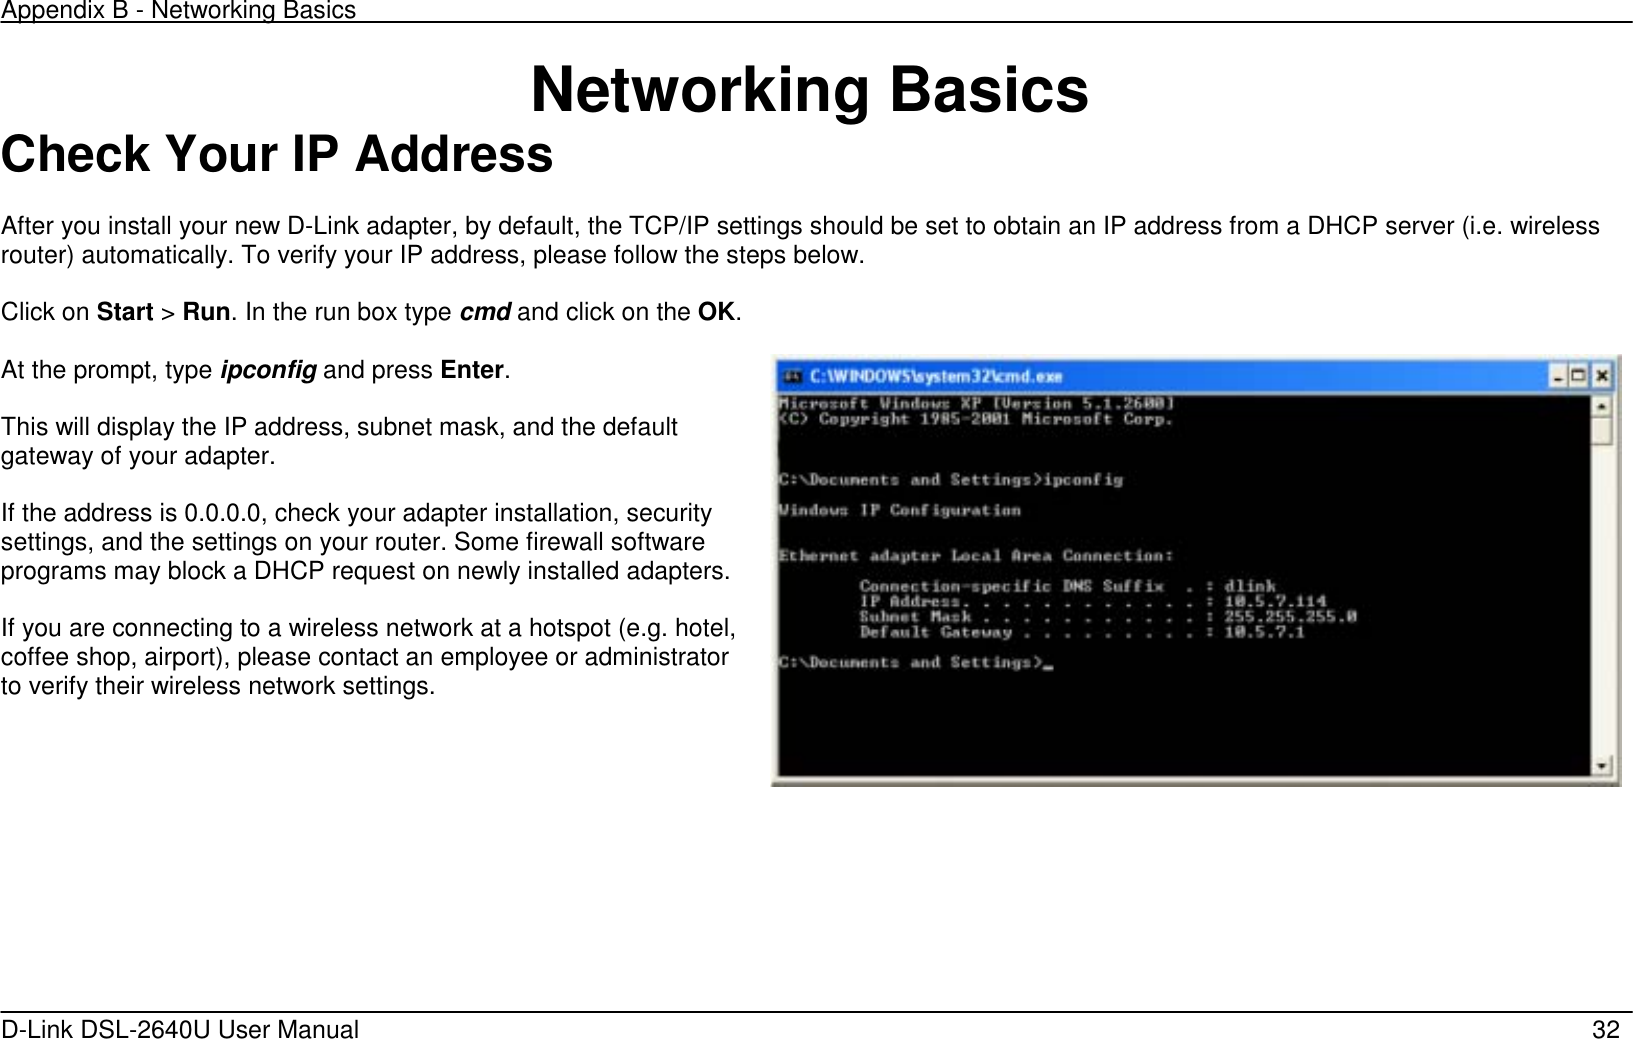 Appendix B - Networking Basics   D-Link DSL-2640U User Manual    32 Networking Basics Check Your IP Address  After you install your new D-Link adapter, by default, the TCP/IP settings should be set to obtain an IP address from a DHCP server (i.e. wireless router) automatically. To verify your IP address, please follow the steps below.  Click on Start &gt; Run. In the run box type cmd and click on the OK.  At the prompt, type ipconfig and press Enter.  This will display the IP address, subnet mask, and the default gateway of your adapter.  If the address is 0.0.0.0, check your adapter installation, security settings, and the settings on your router. Some firewall software programs may block a DHCP request on newly installed adapters.  If you are connecting to a wireless network at a hotspot (e.g. hotel, coffee shop, airport), please contact an employee or administrator to verify their wireless network settings.    